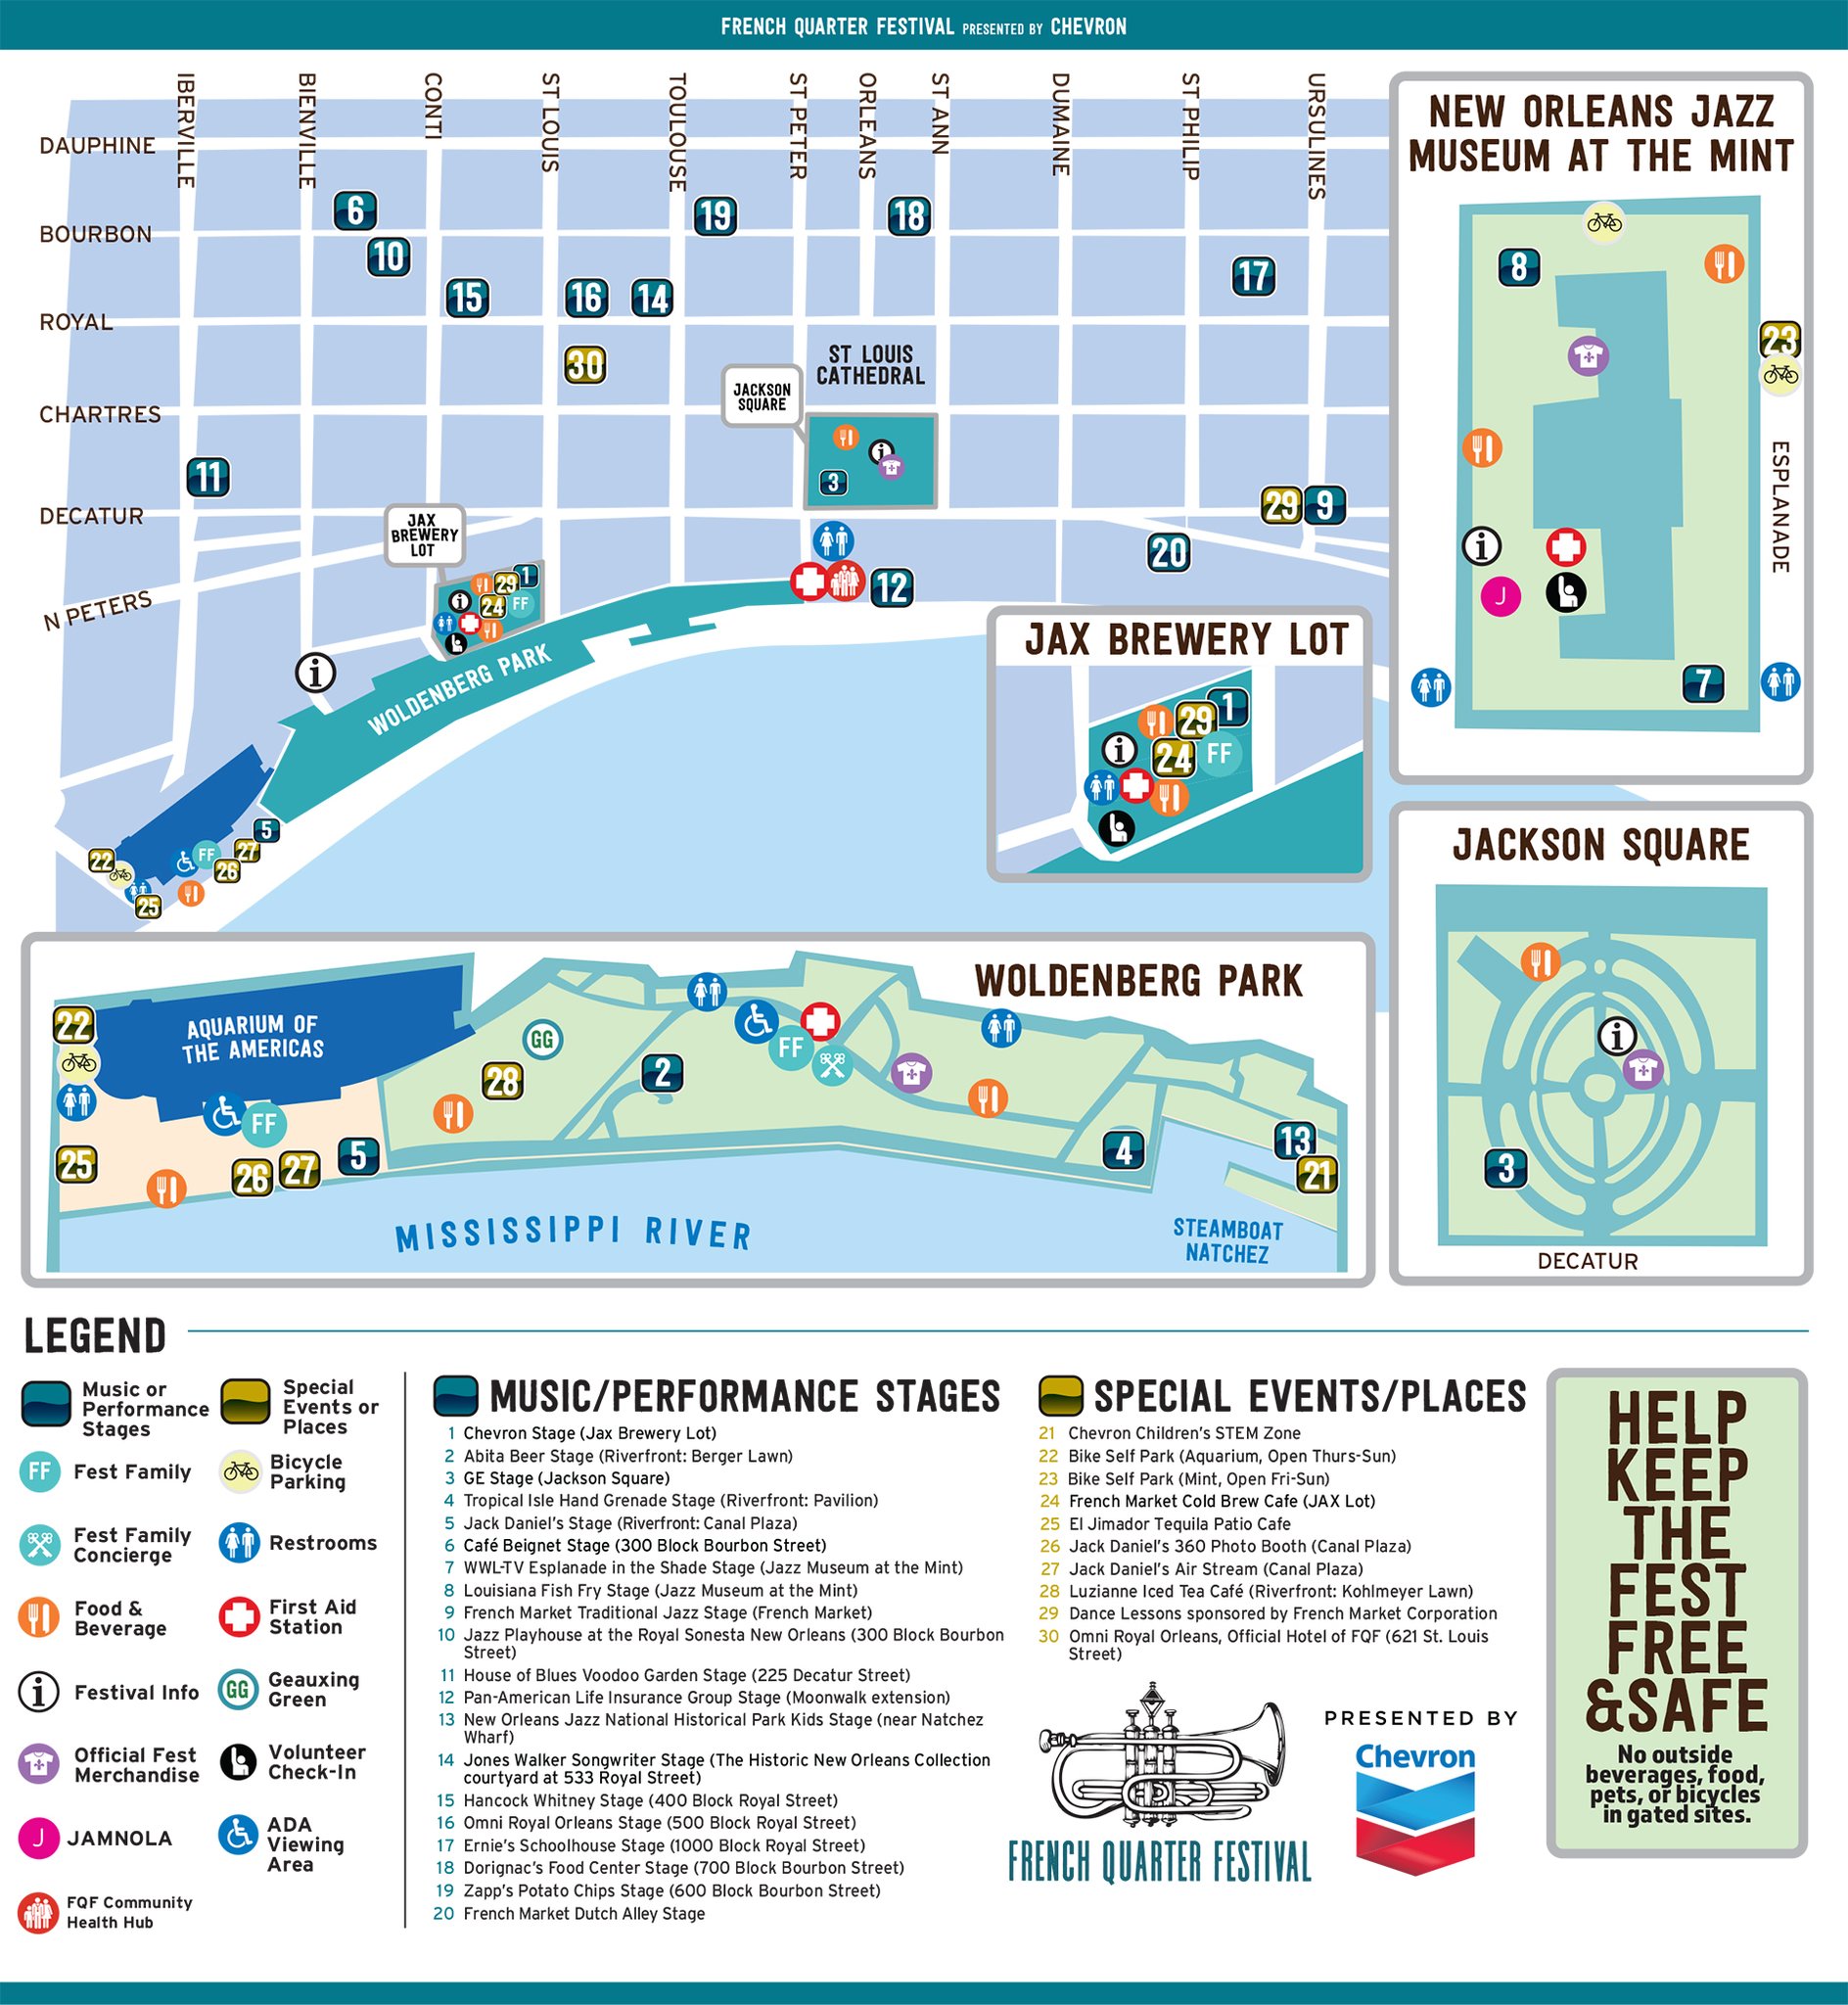 French Quarter Festivals, Inc on Twitter "In New Orleans, when there's